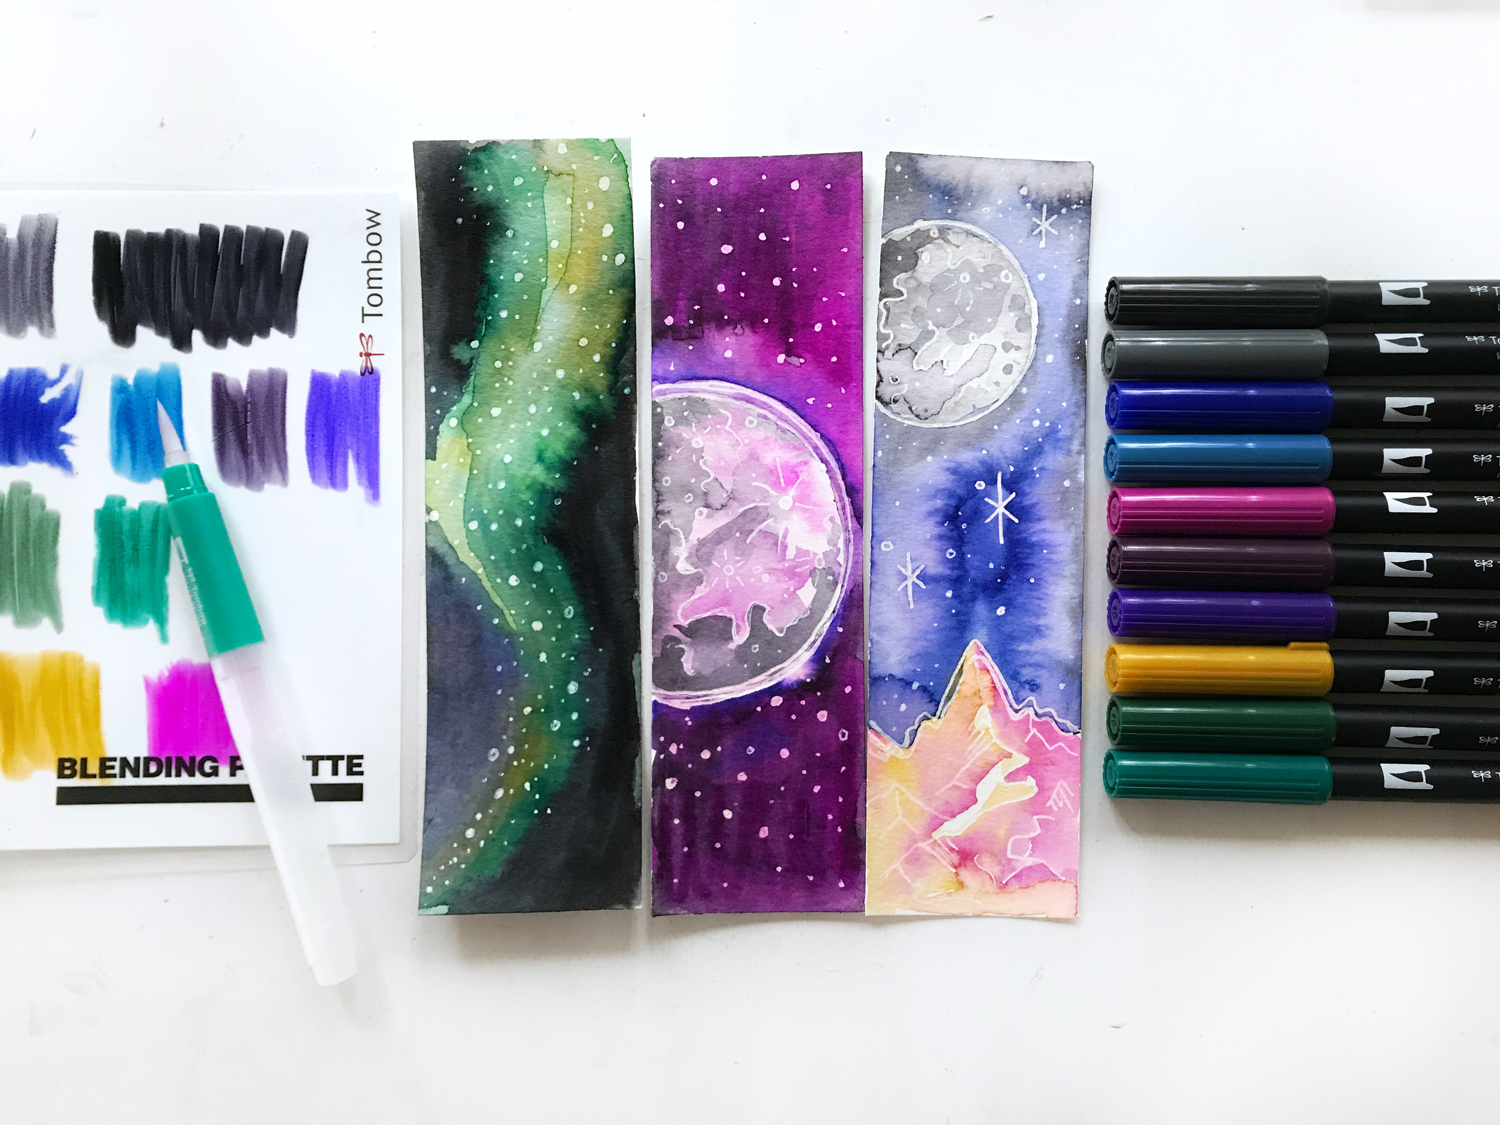 Learn how to create some Bohemian Watercolor Galaxy Bookmarks using this tutorial by @studiokatie and Bohemian Dual Brush Pens from @tombowusa #tombowusa #tombow #bookmarks